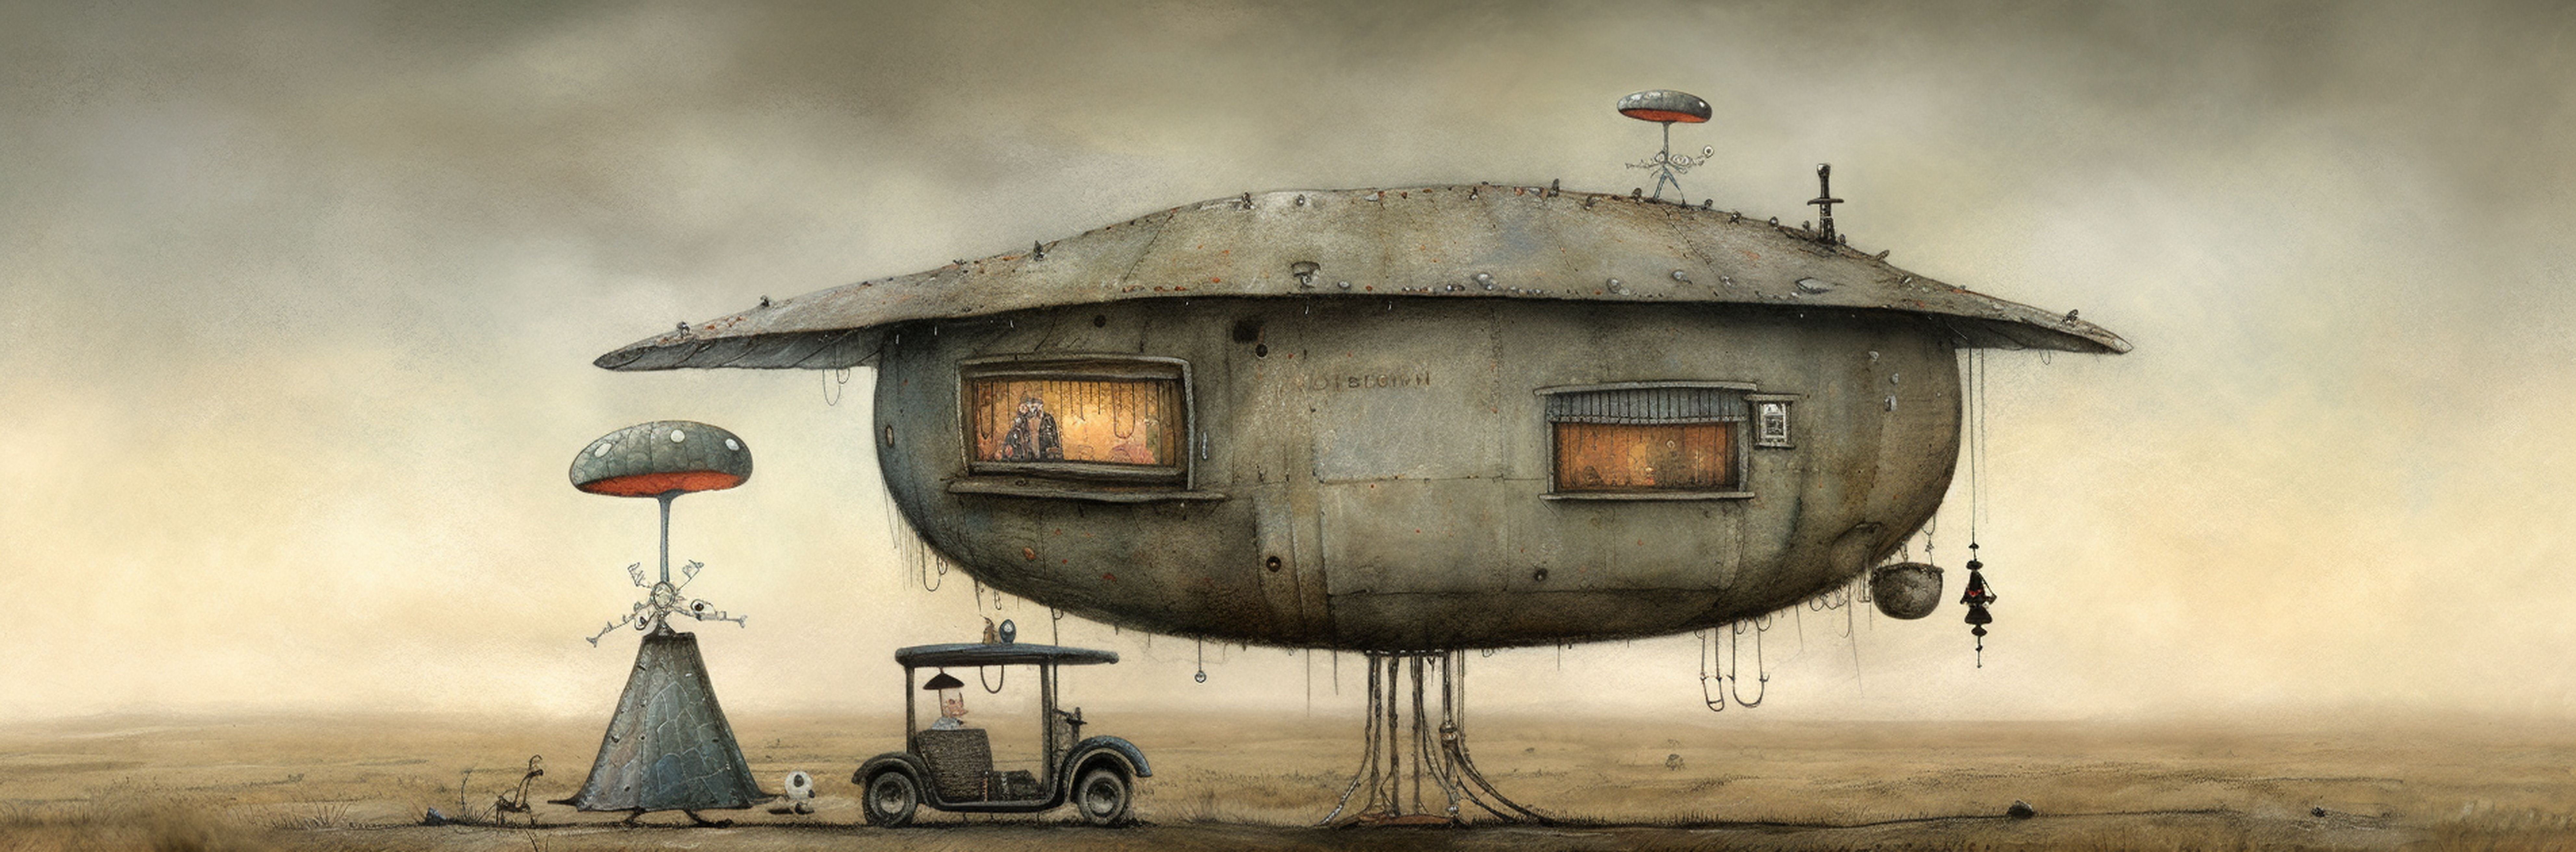 Ramades - House, car and flying saucer 1